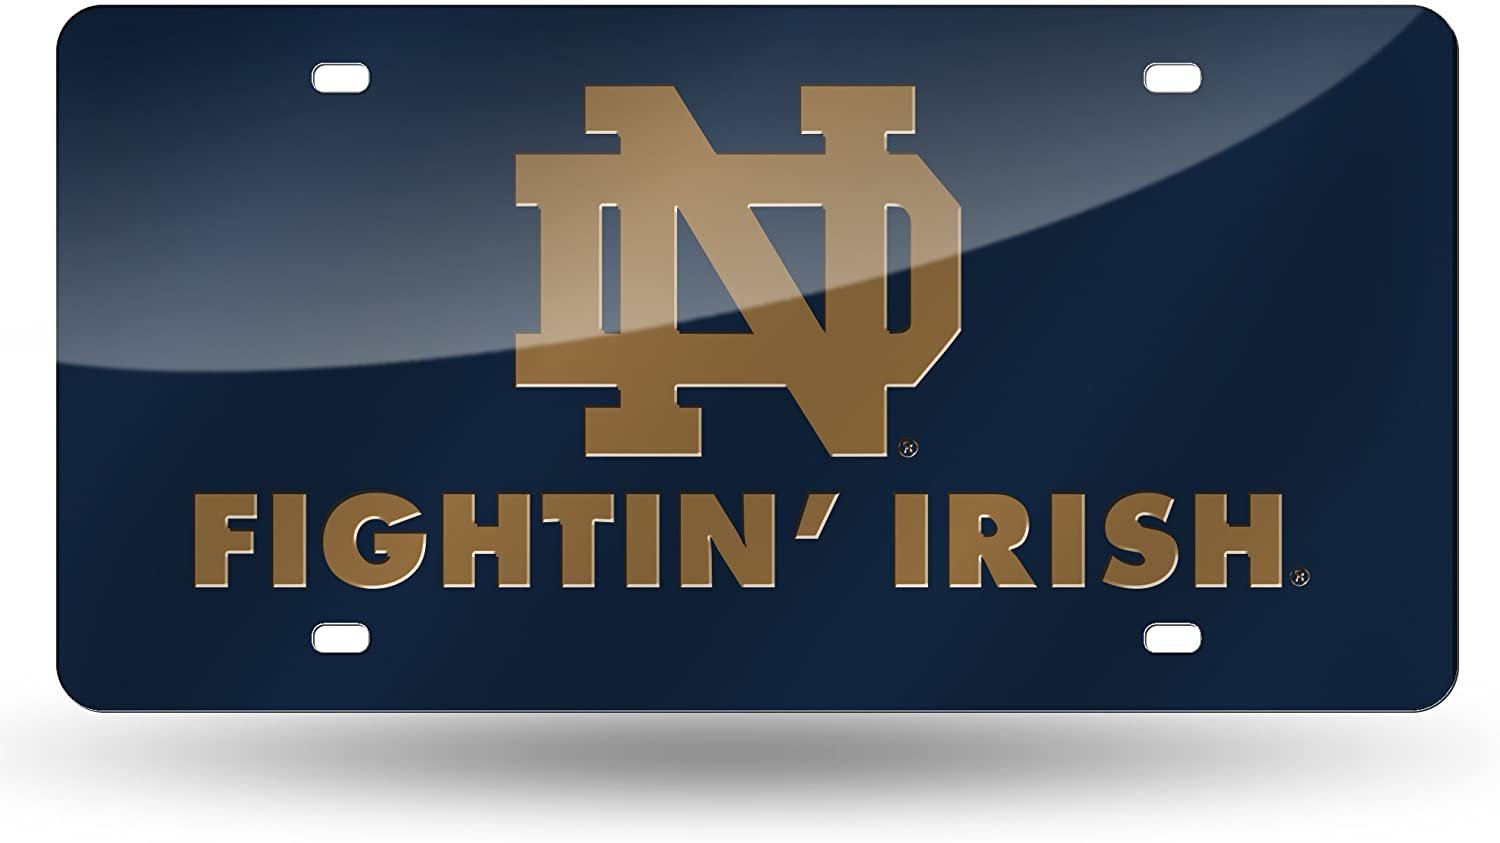 University of Notre Dame Fighting Irish Premium Laser Cut Tag License Plate, Blue, Mirrored Acrylic Inlaid, 12x6 Inch